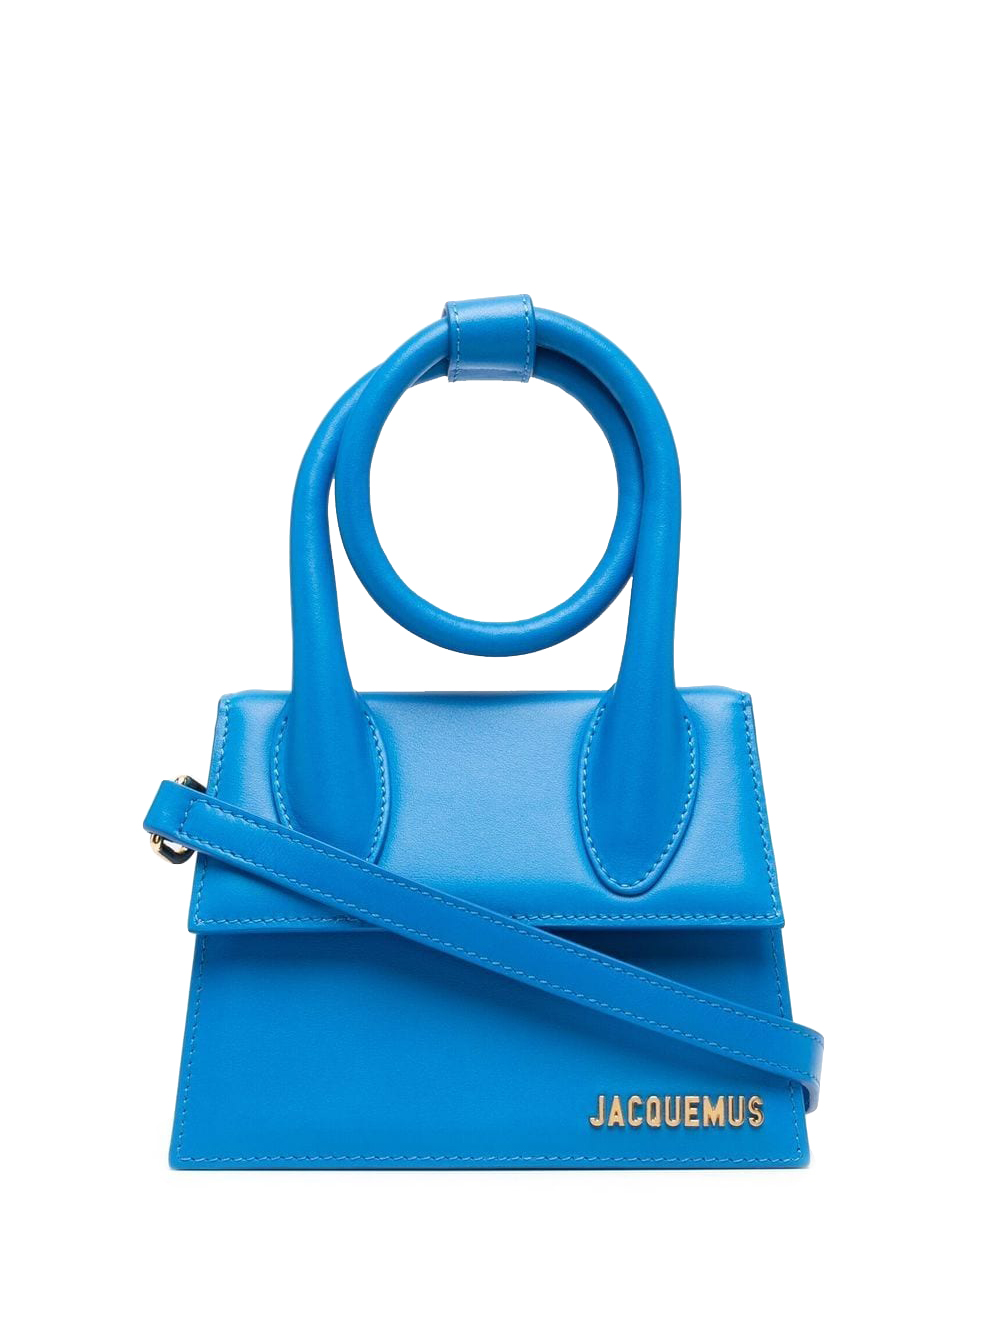 Jacquemus Le Chiquito Noeud Coiled Handbag Blue in Leather with 